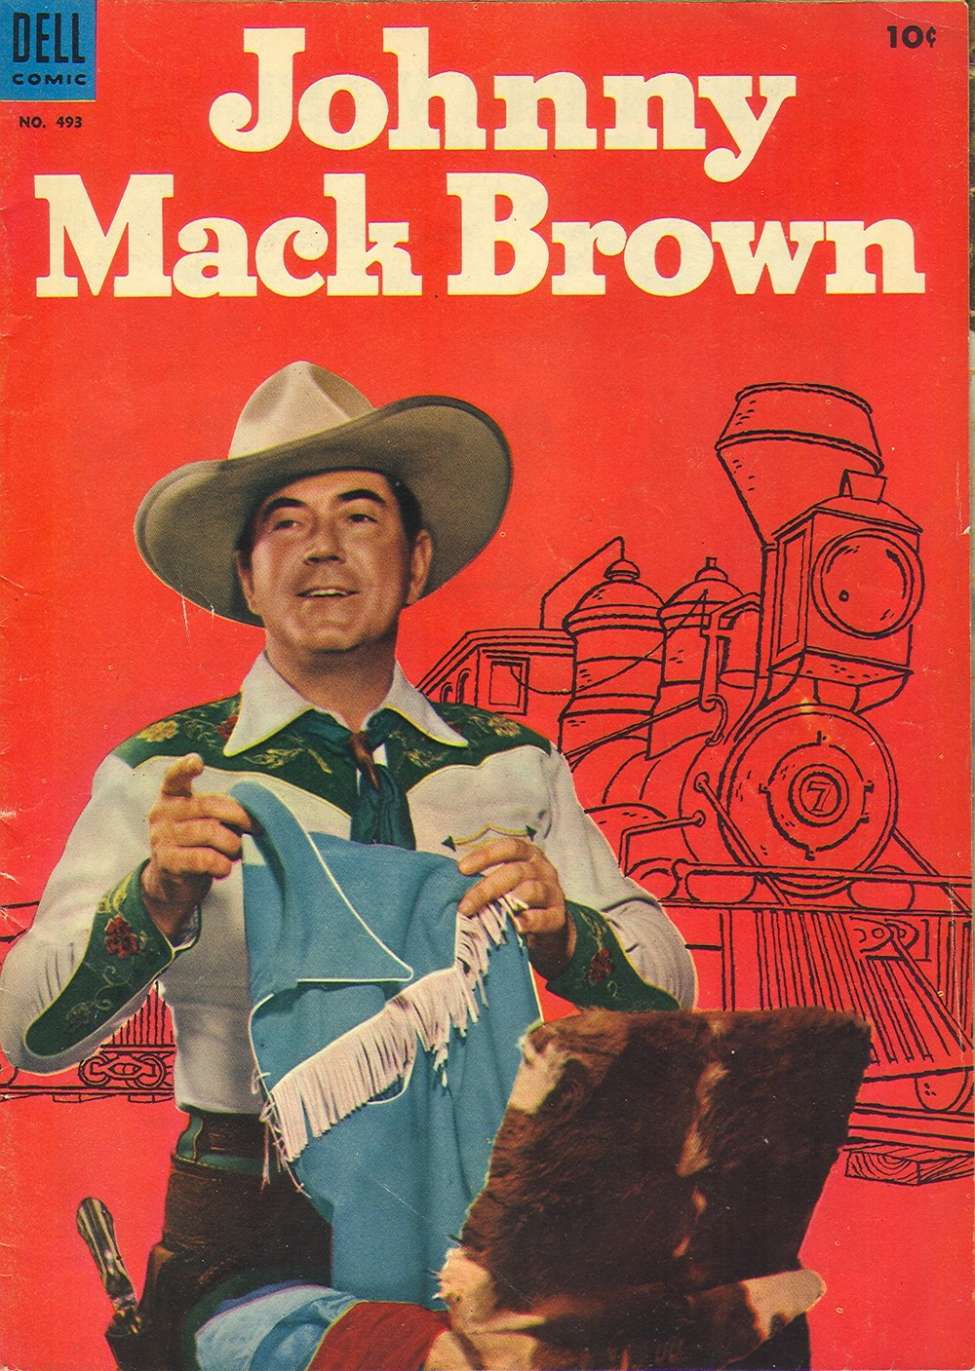 Book Cover For 0493 - Johnny Mack Brown